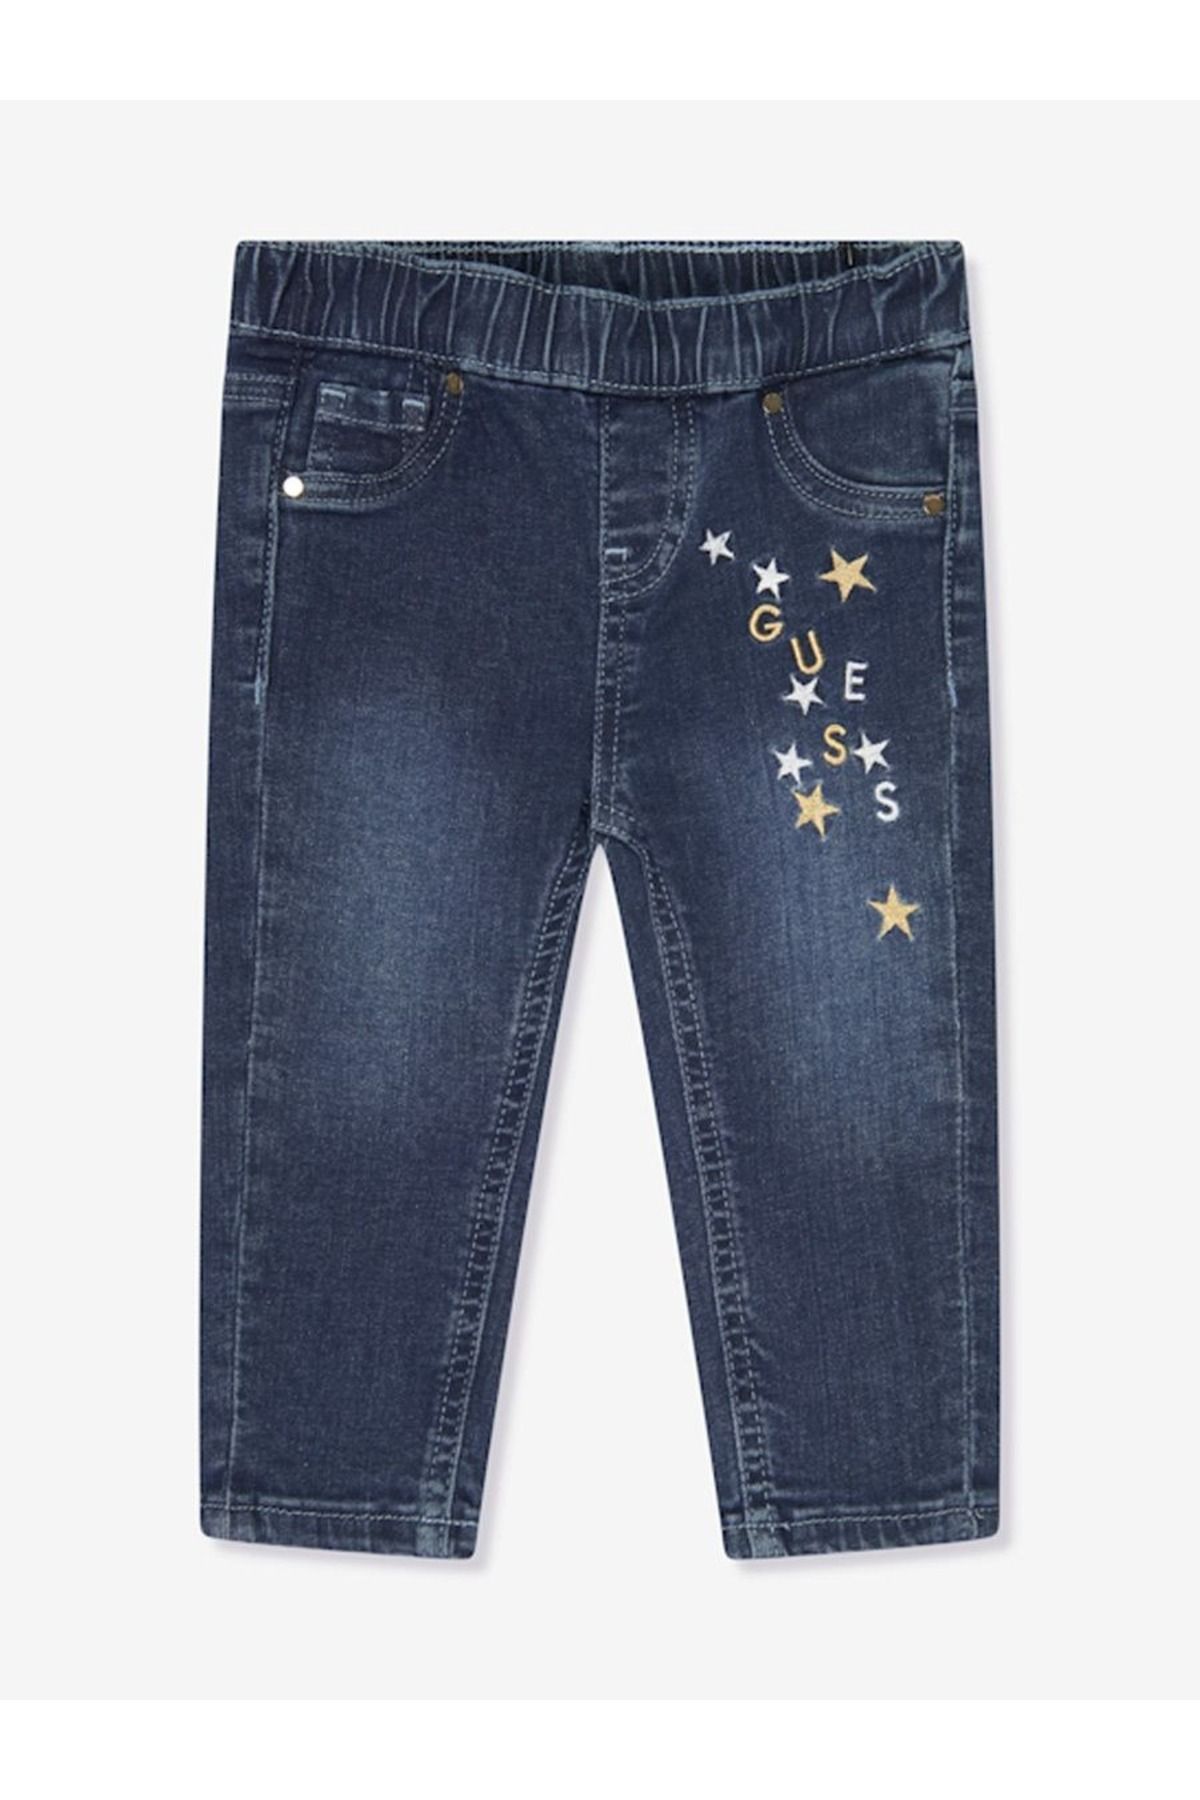 Guess DENIM PULL-ON PANTS